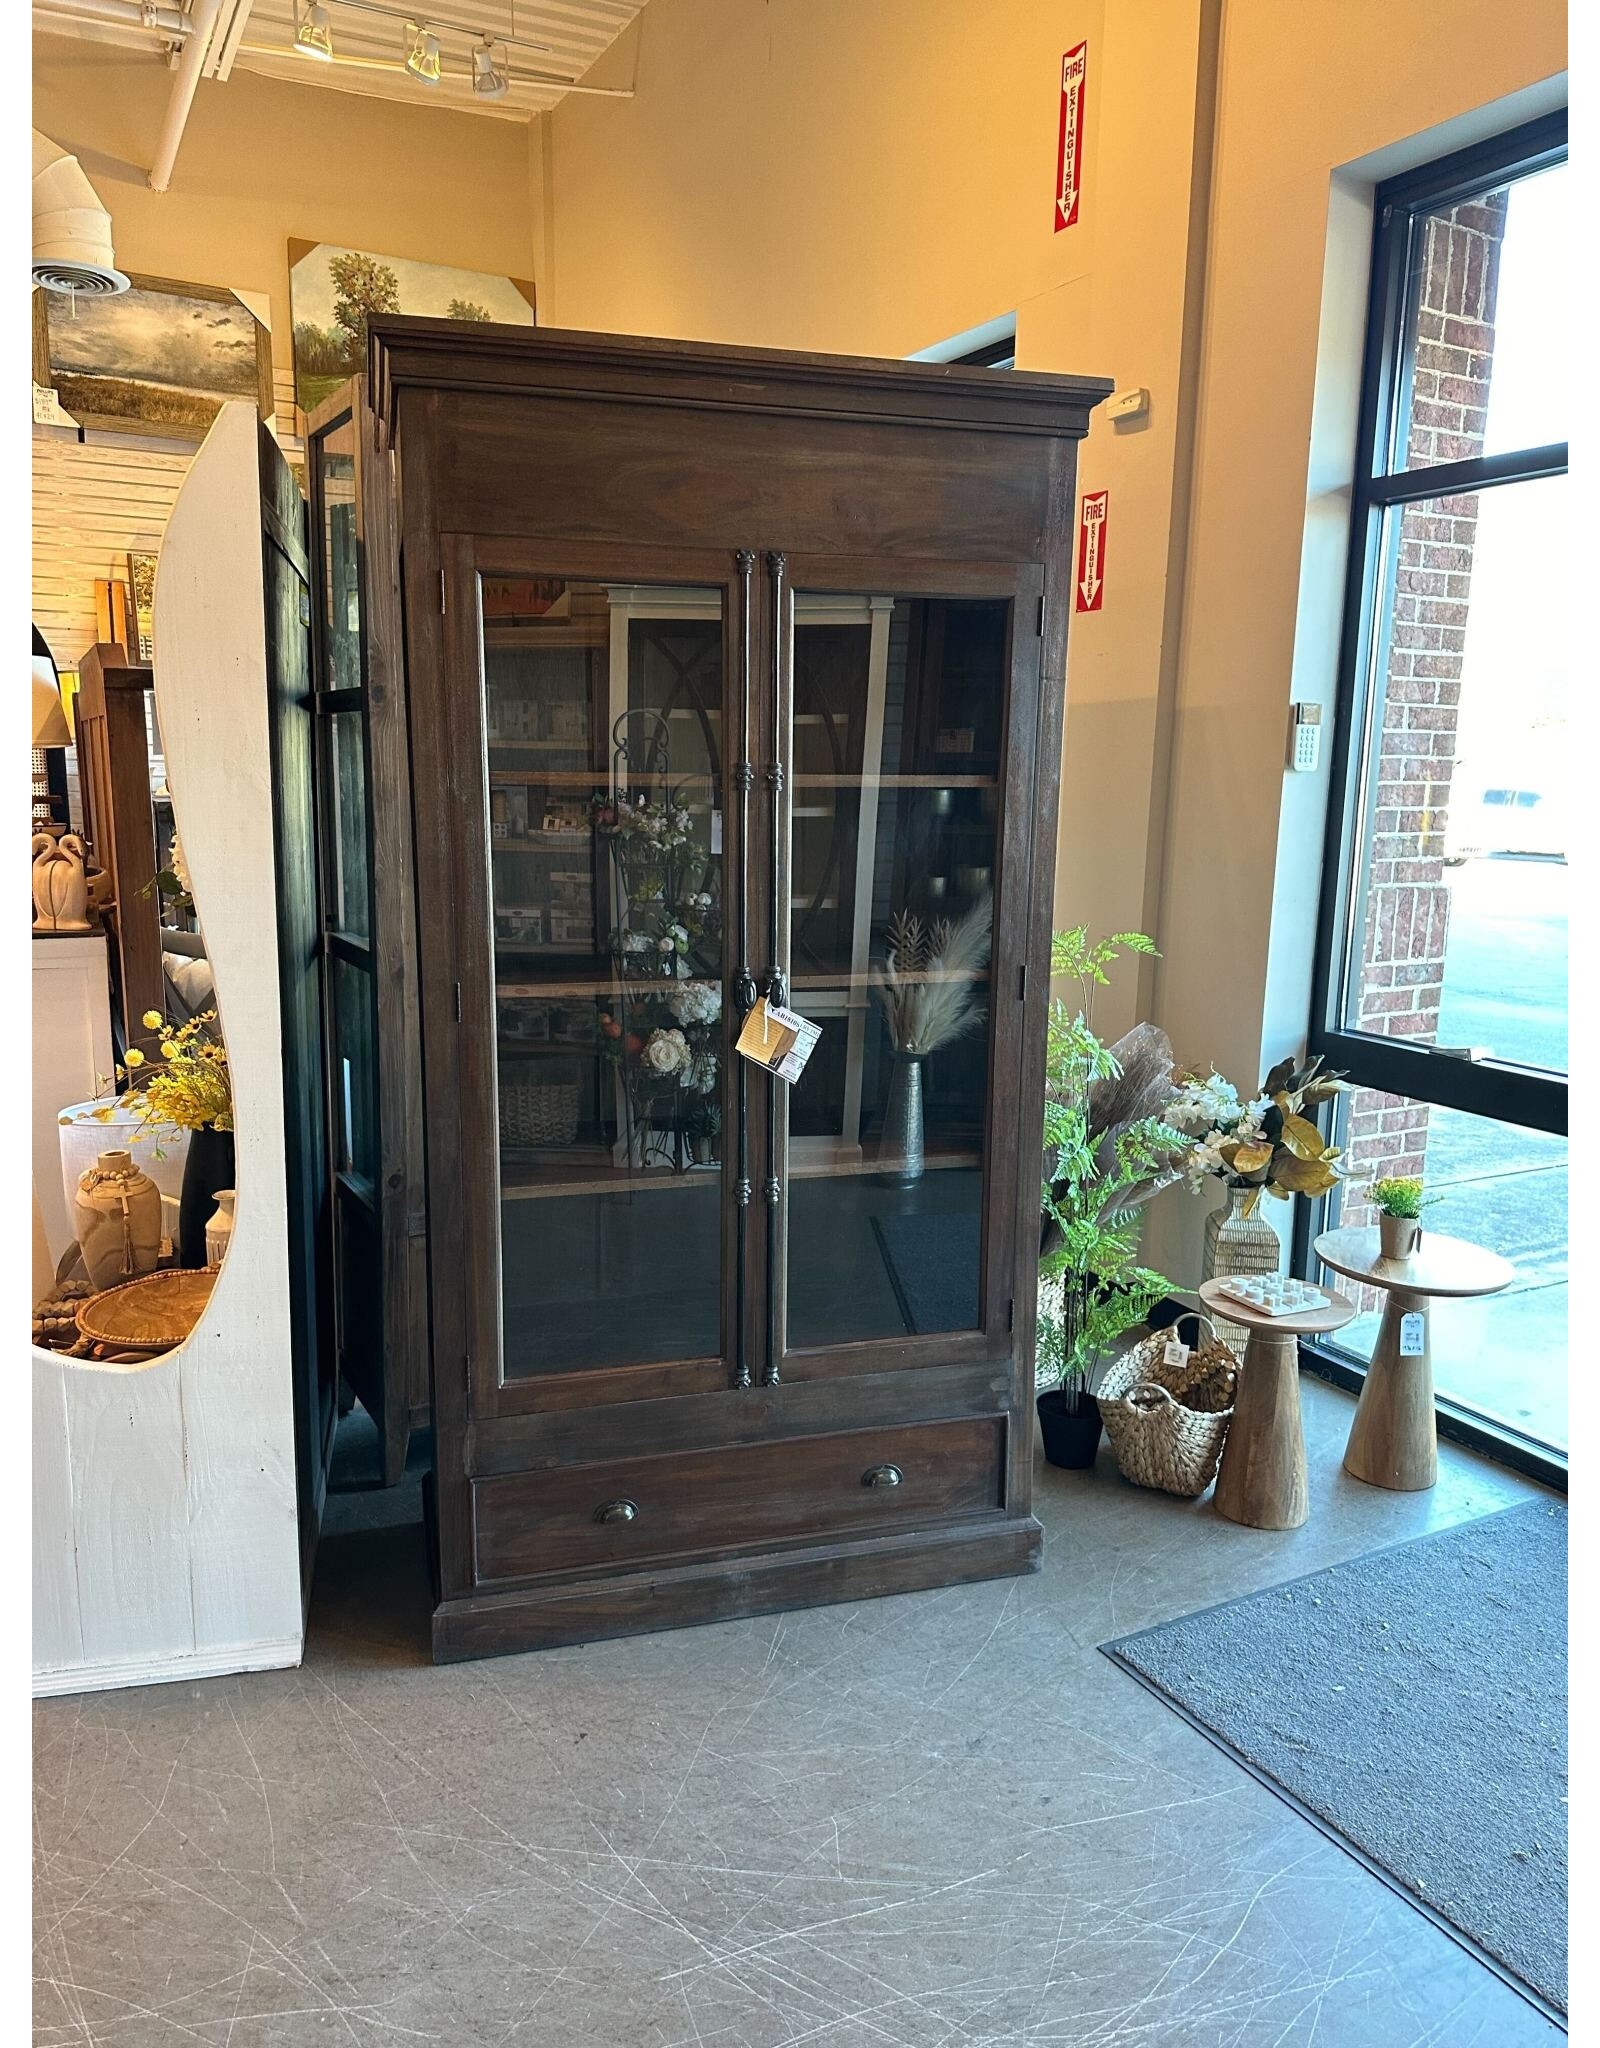 CAB1810 Hometown Armoire 46.1 x 20.1 x 84.2"H